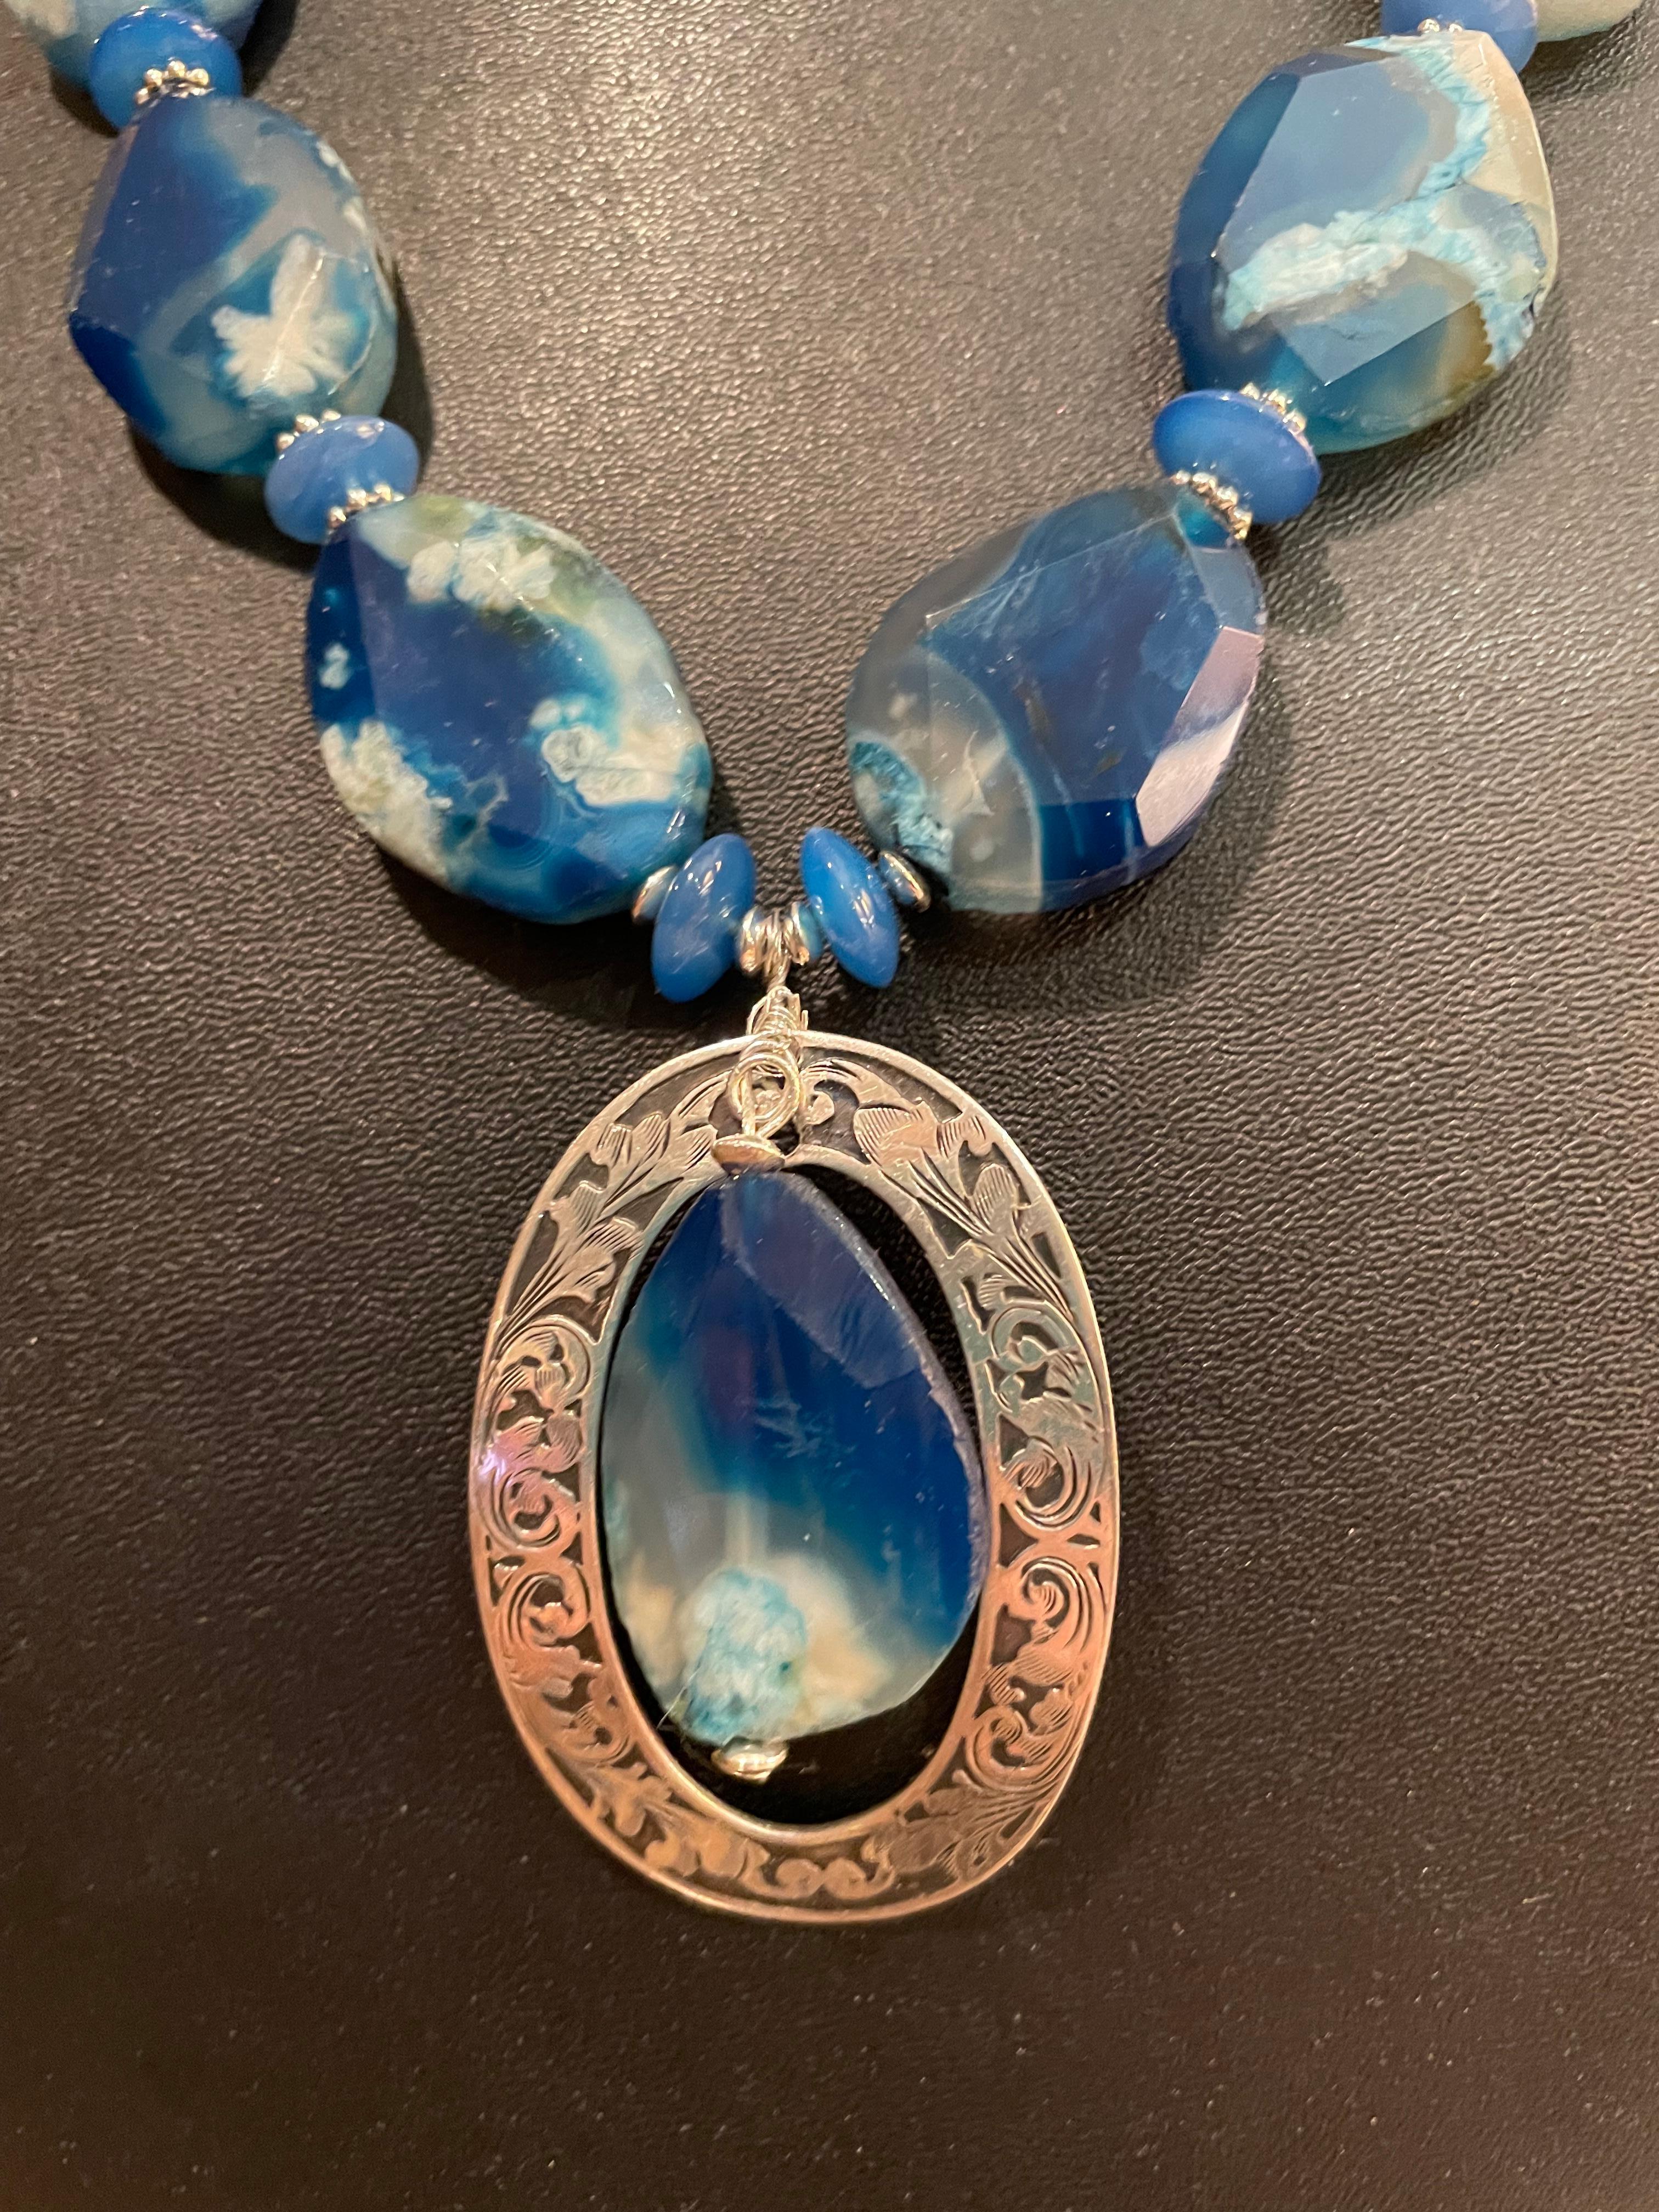 Lorraine’s Bijoux offers an impressive Blue Glass faceted necklace with a vintage Sterling Silver Brooch as the centerpiece. 
These large variegated blue glass beads include many shades of azure and sparkle due to the faceting. Each is different